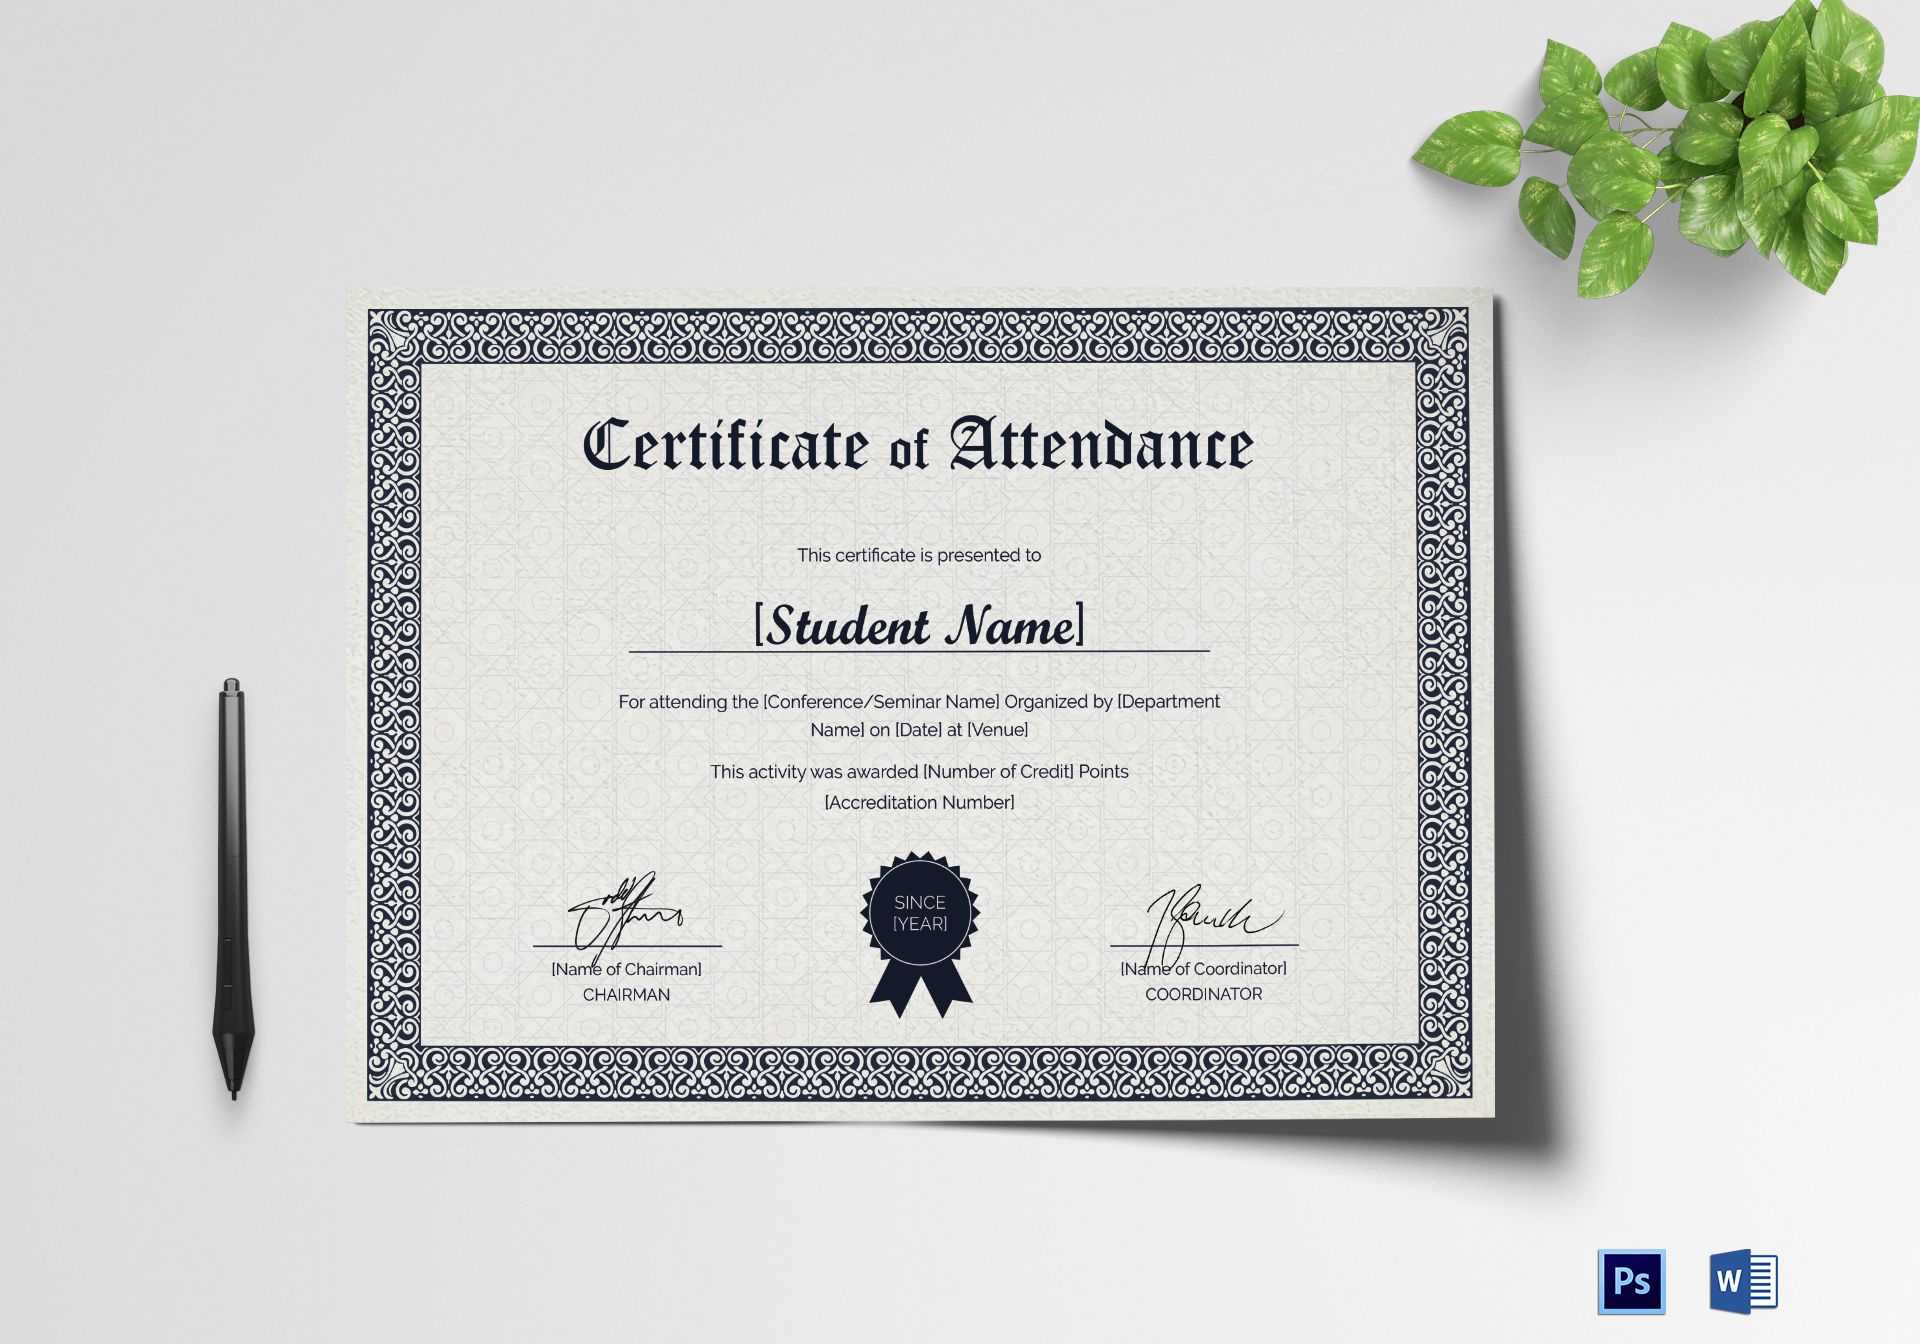 Students Attendance Certificate Template For Conference Certificate Of Attendance Template